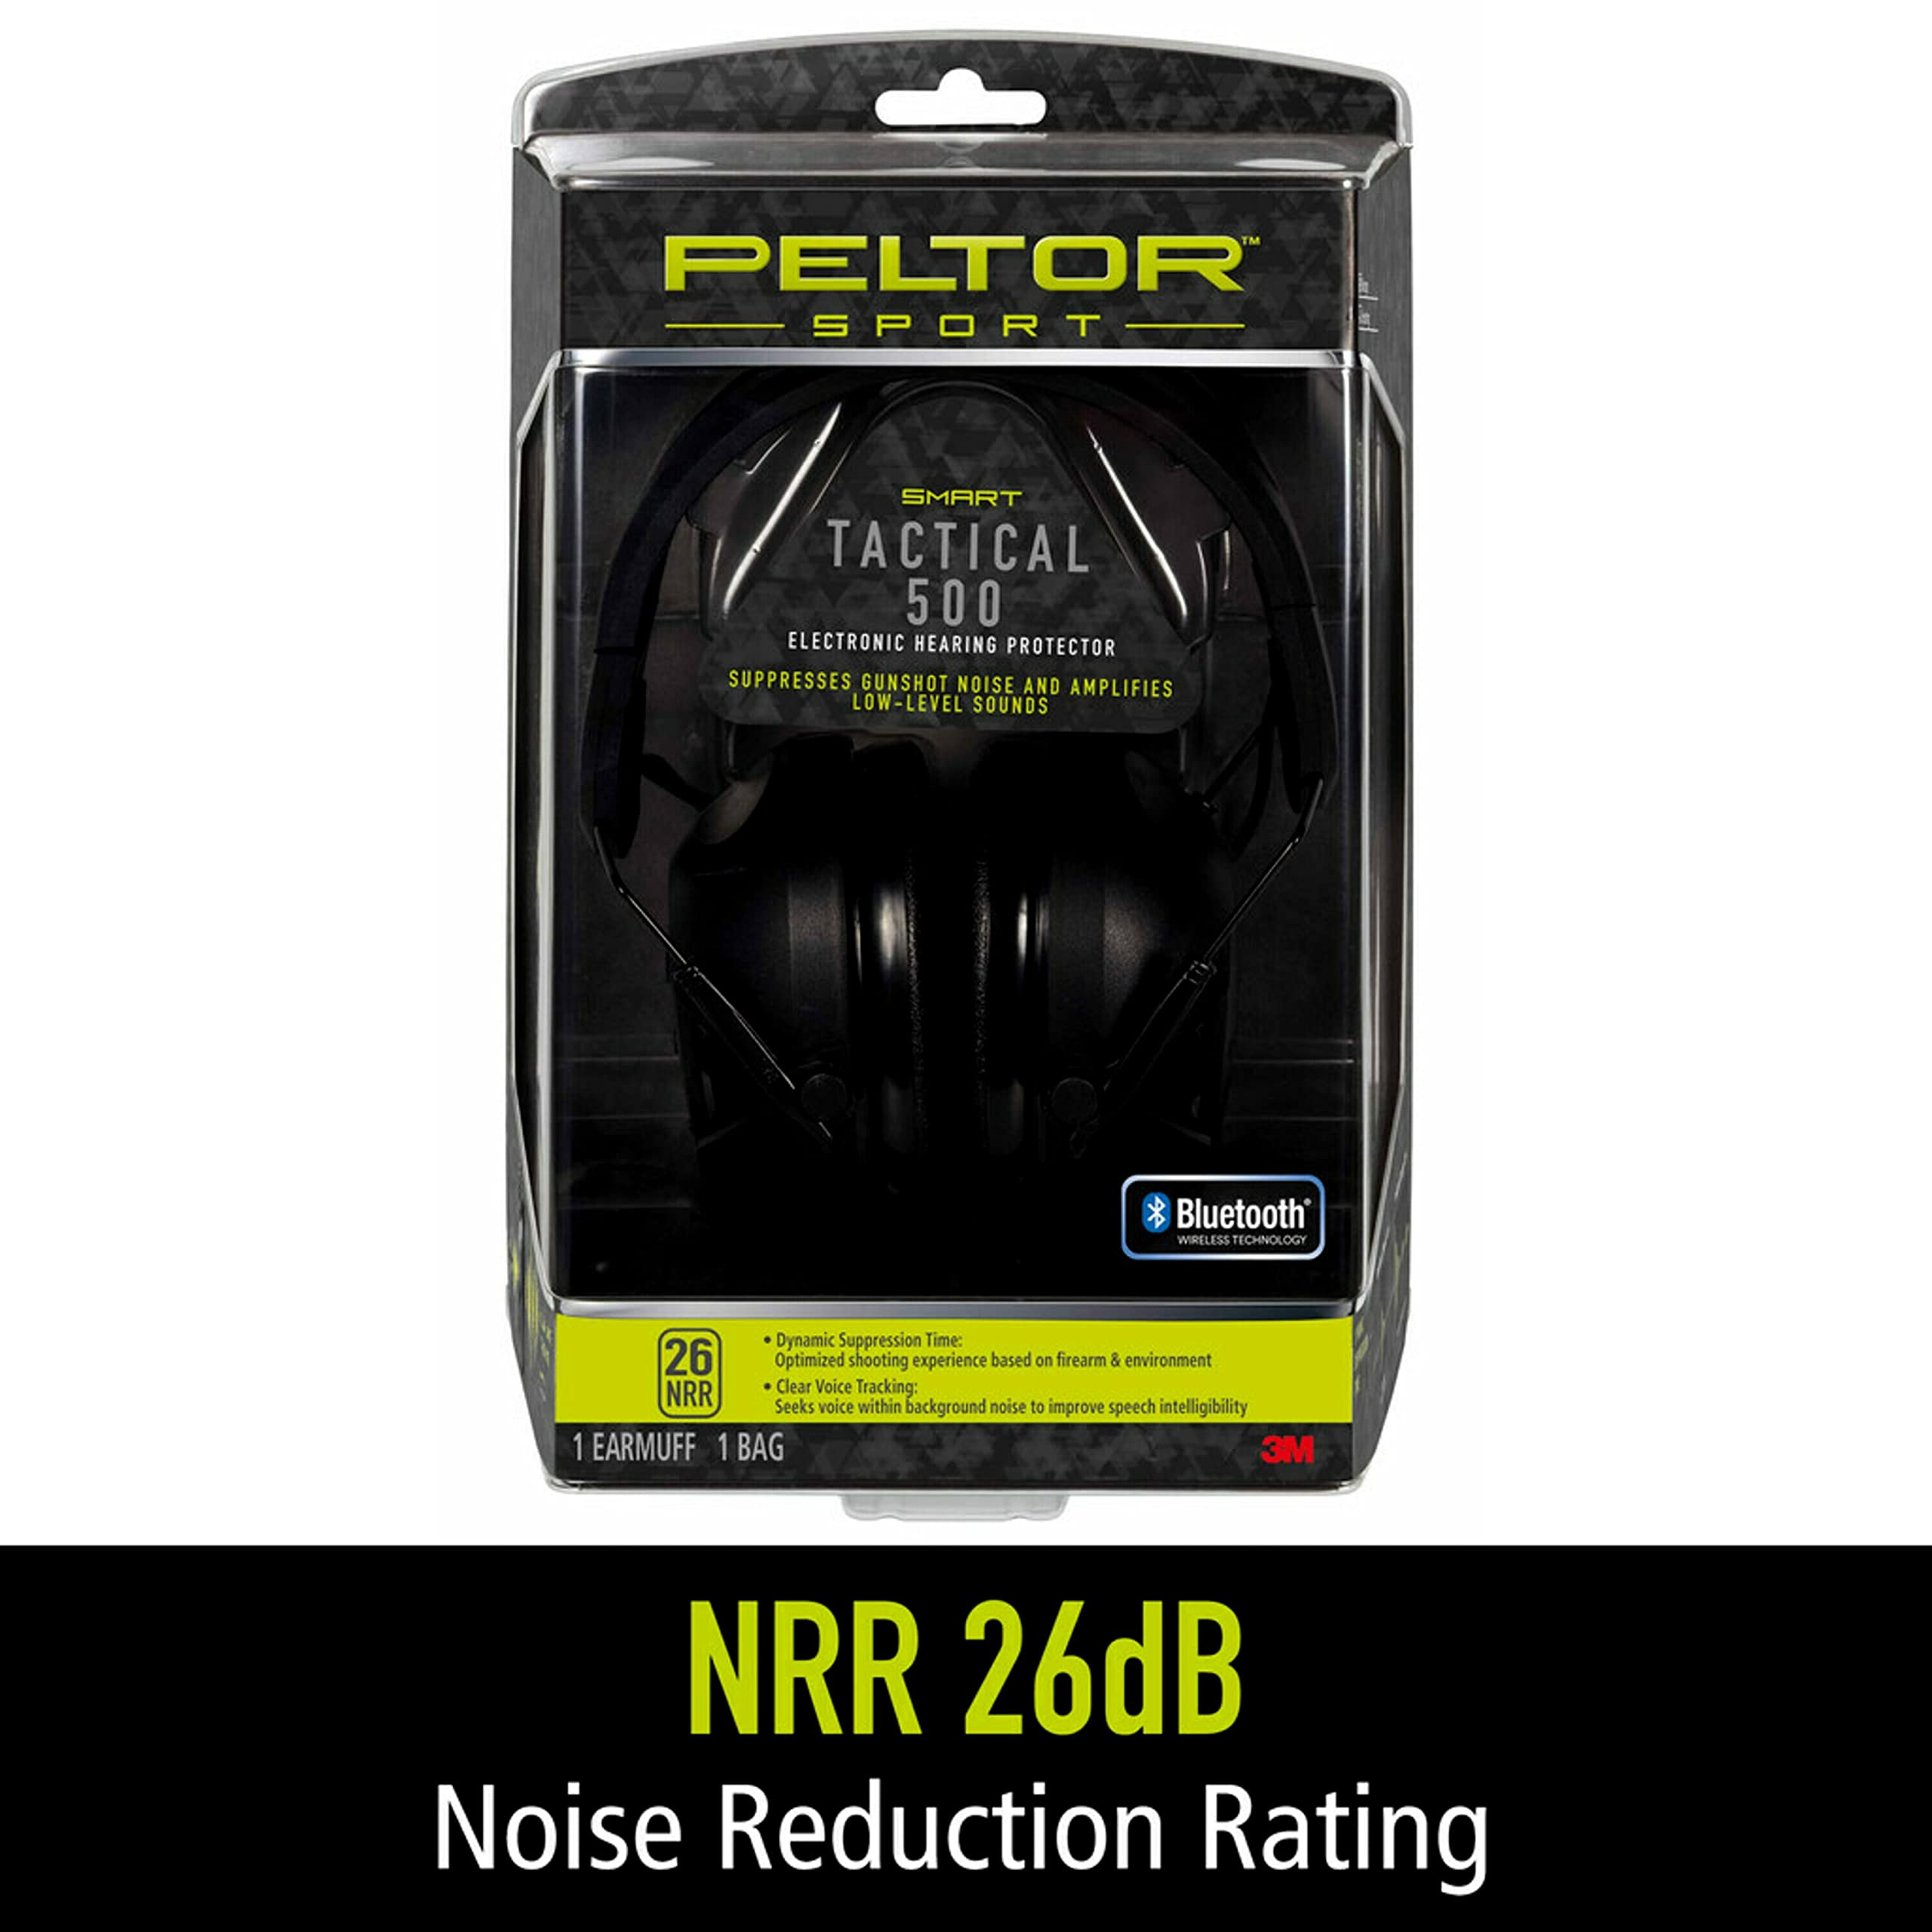 Peltor Sport Tactical 500 Smart Electronic Hearing Protector with Bluetooth Wireless Technology, NRR 26 dB, Bluetooth Headphones Ideal for the Range, Shooting and Hunting,Black